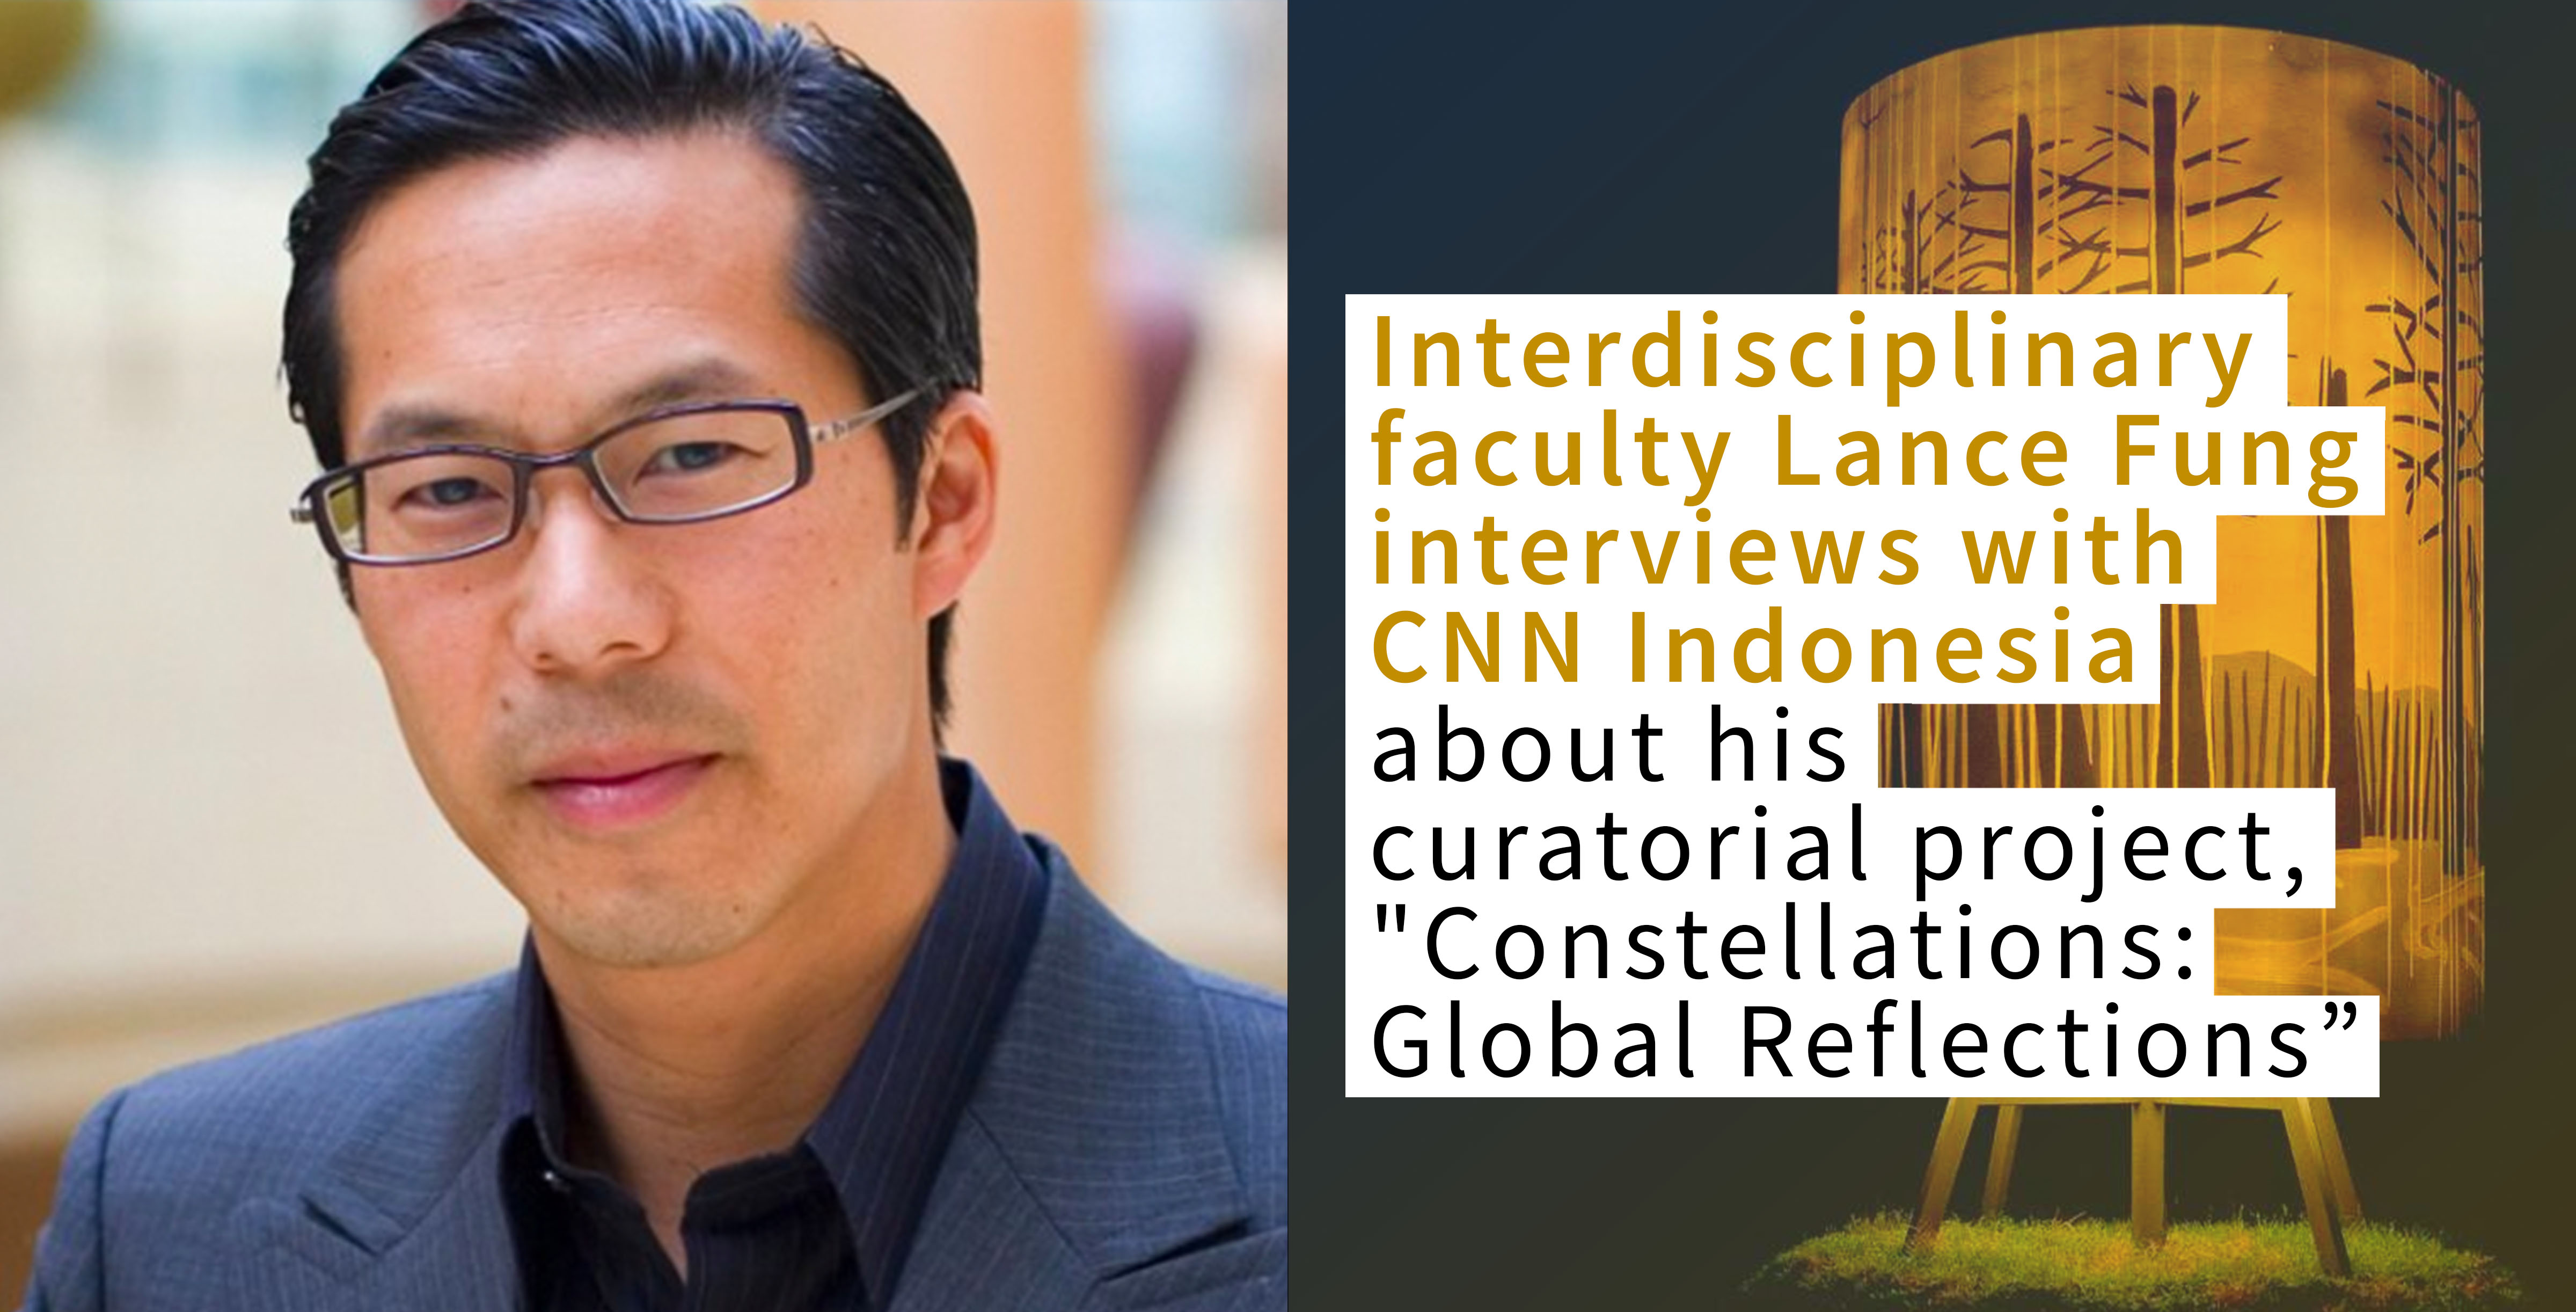 Faculty Feature of Lance Fung and his interview with CNN Indonesia about his curatorial project.